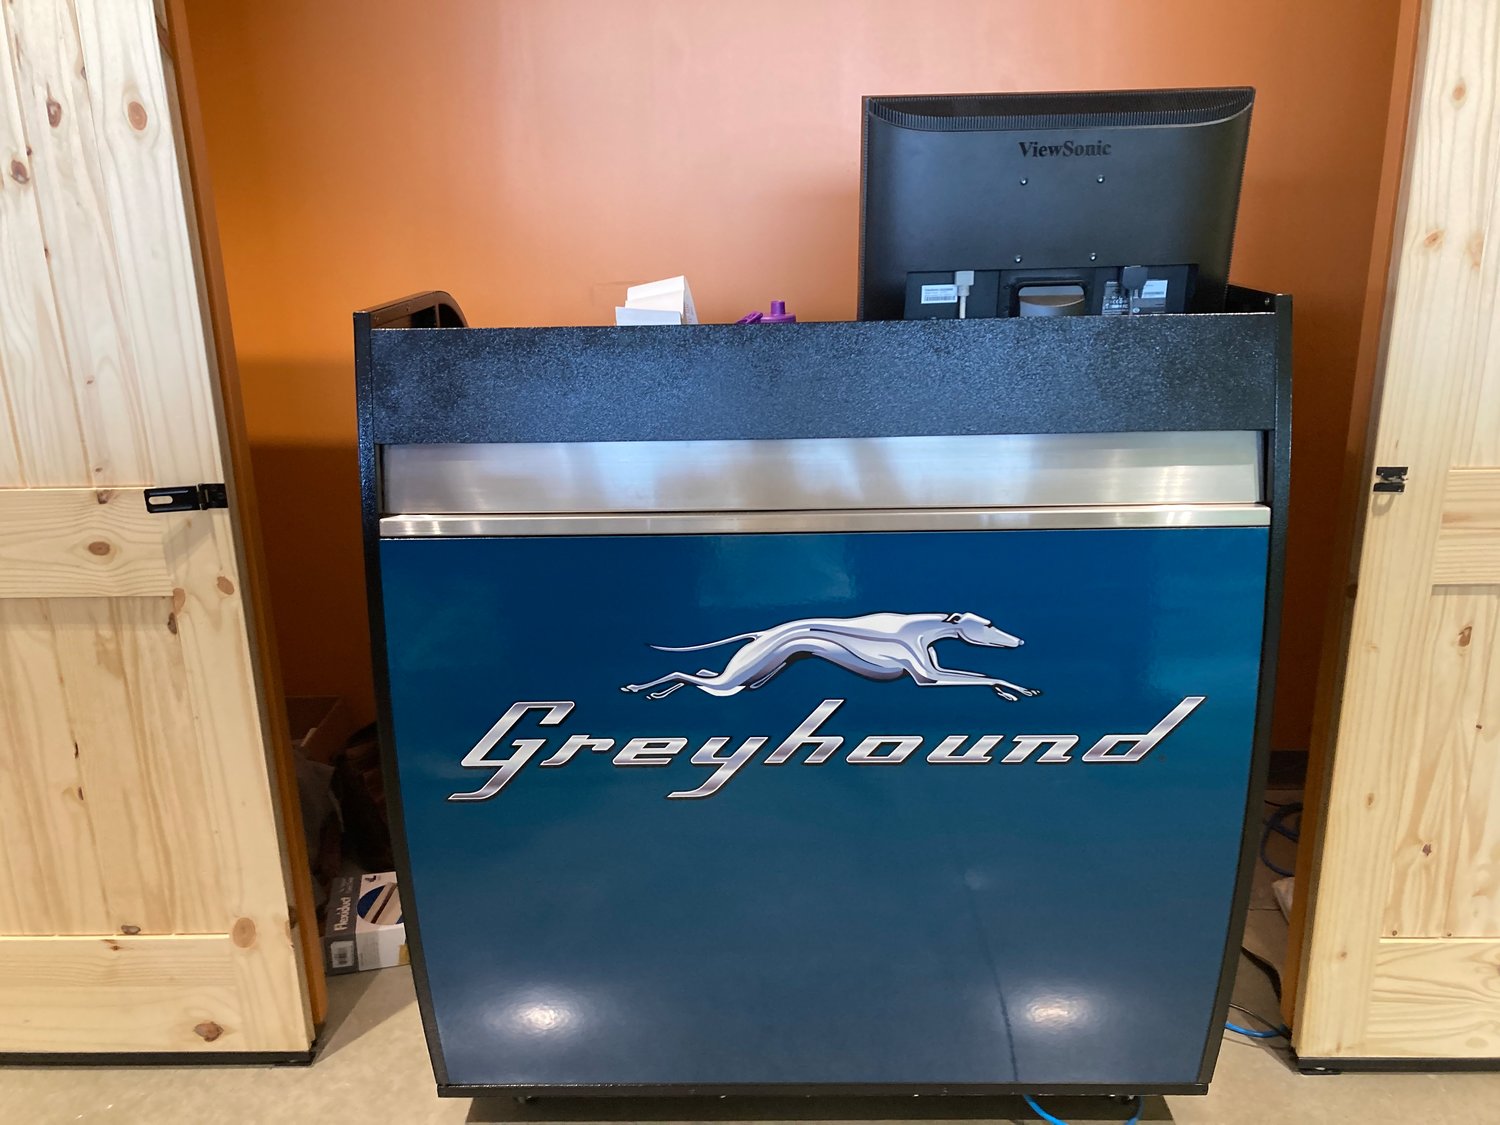 Greyhound will operate a valet stand inside Arna's Food Mart.